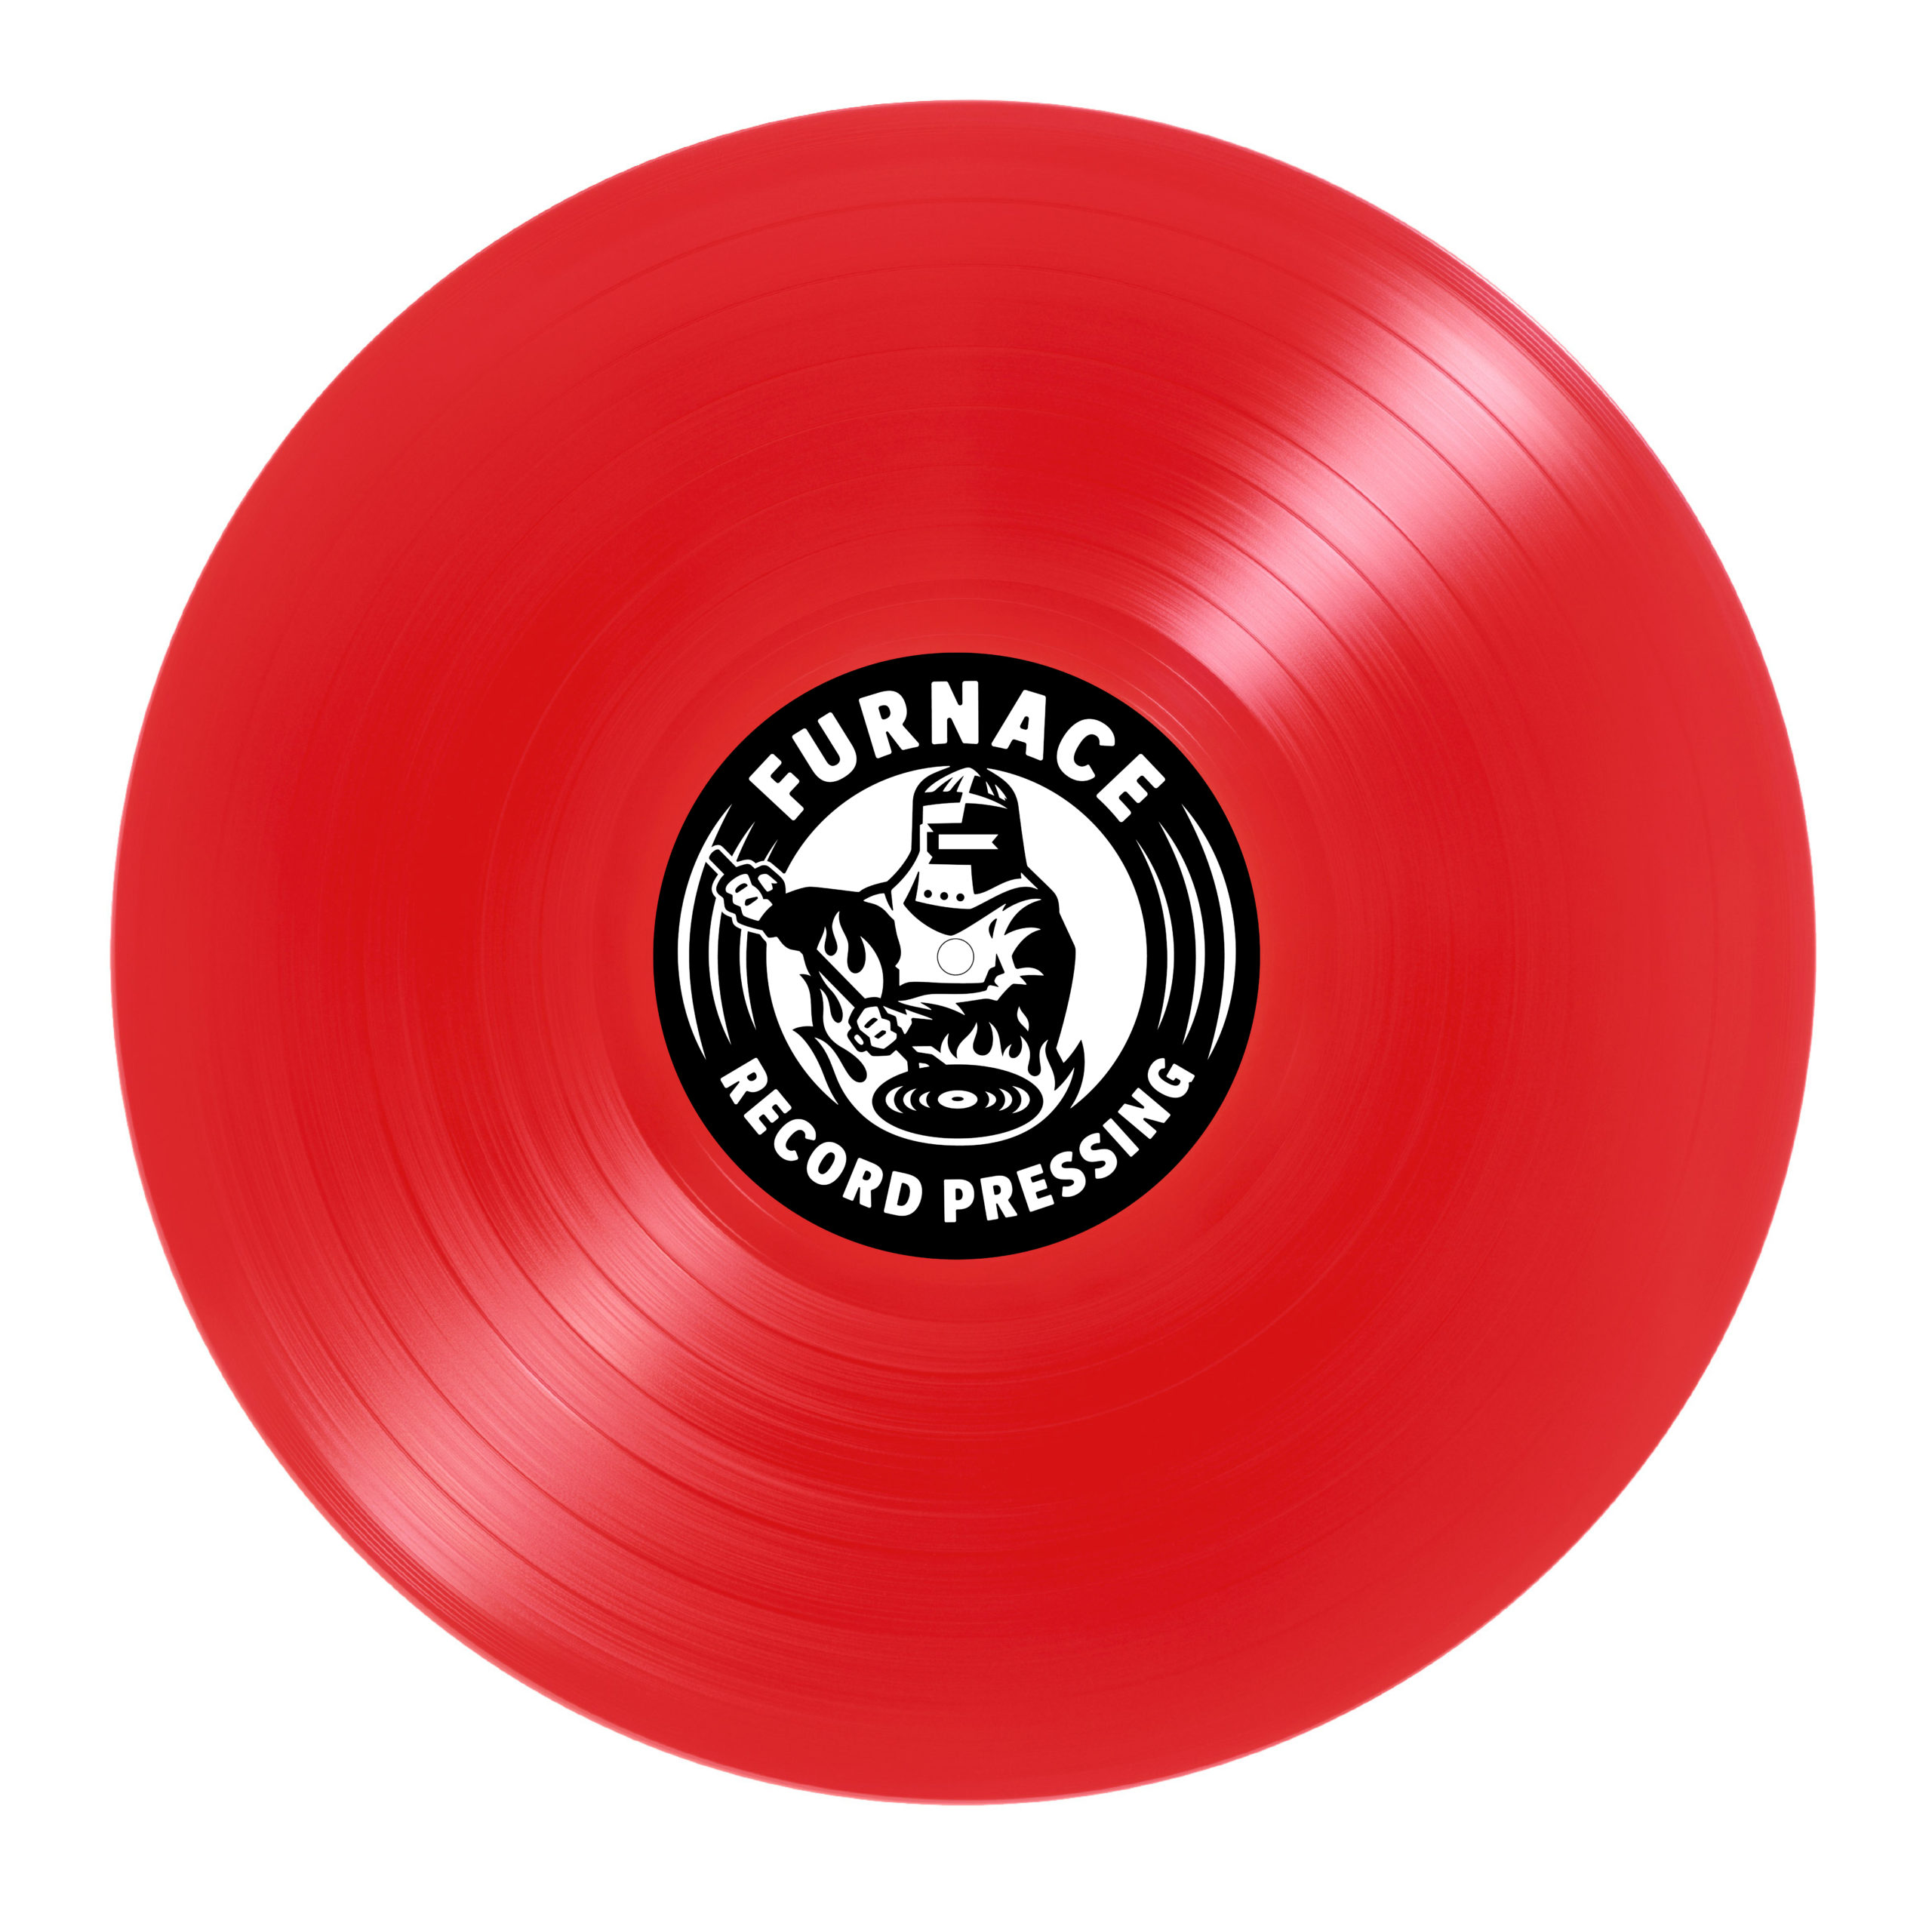 COLOR & SPECIAL EFFECT VINYL – Furnace Record Pressing